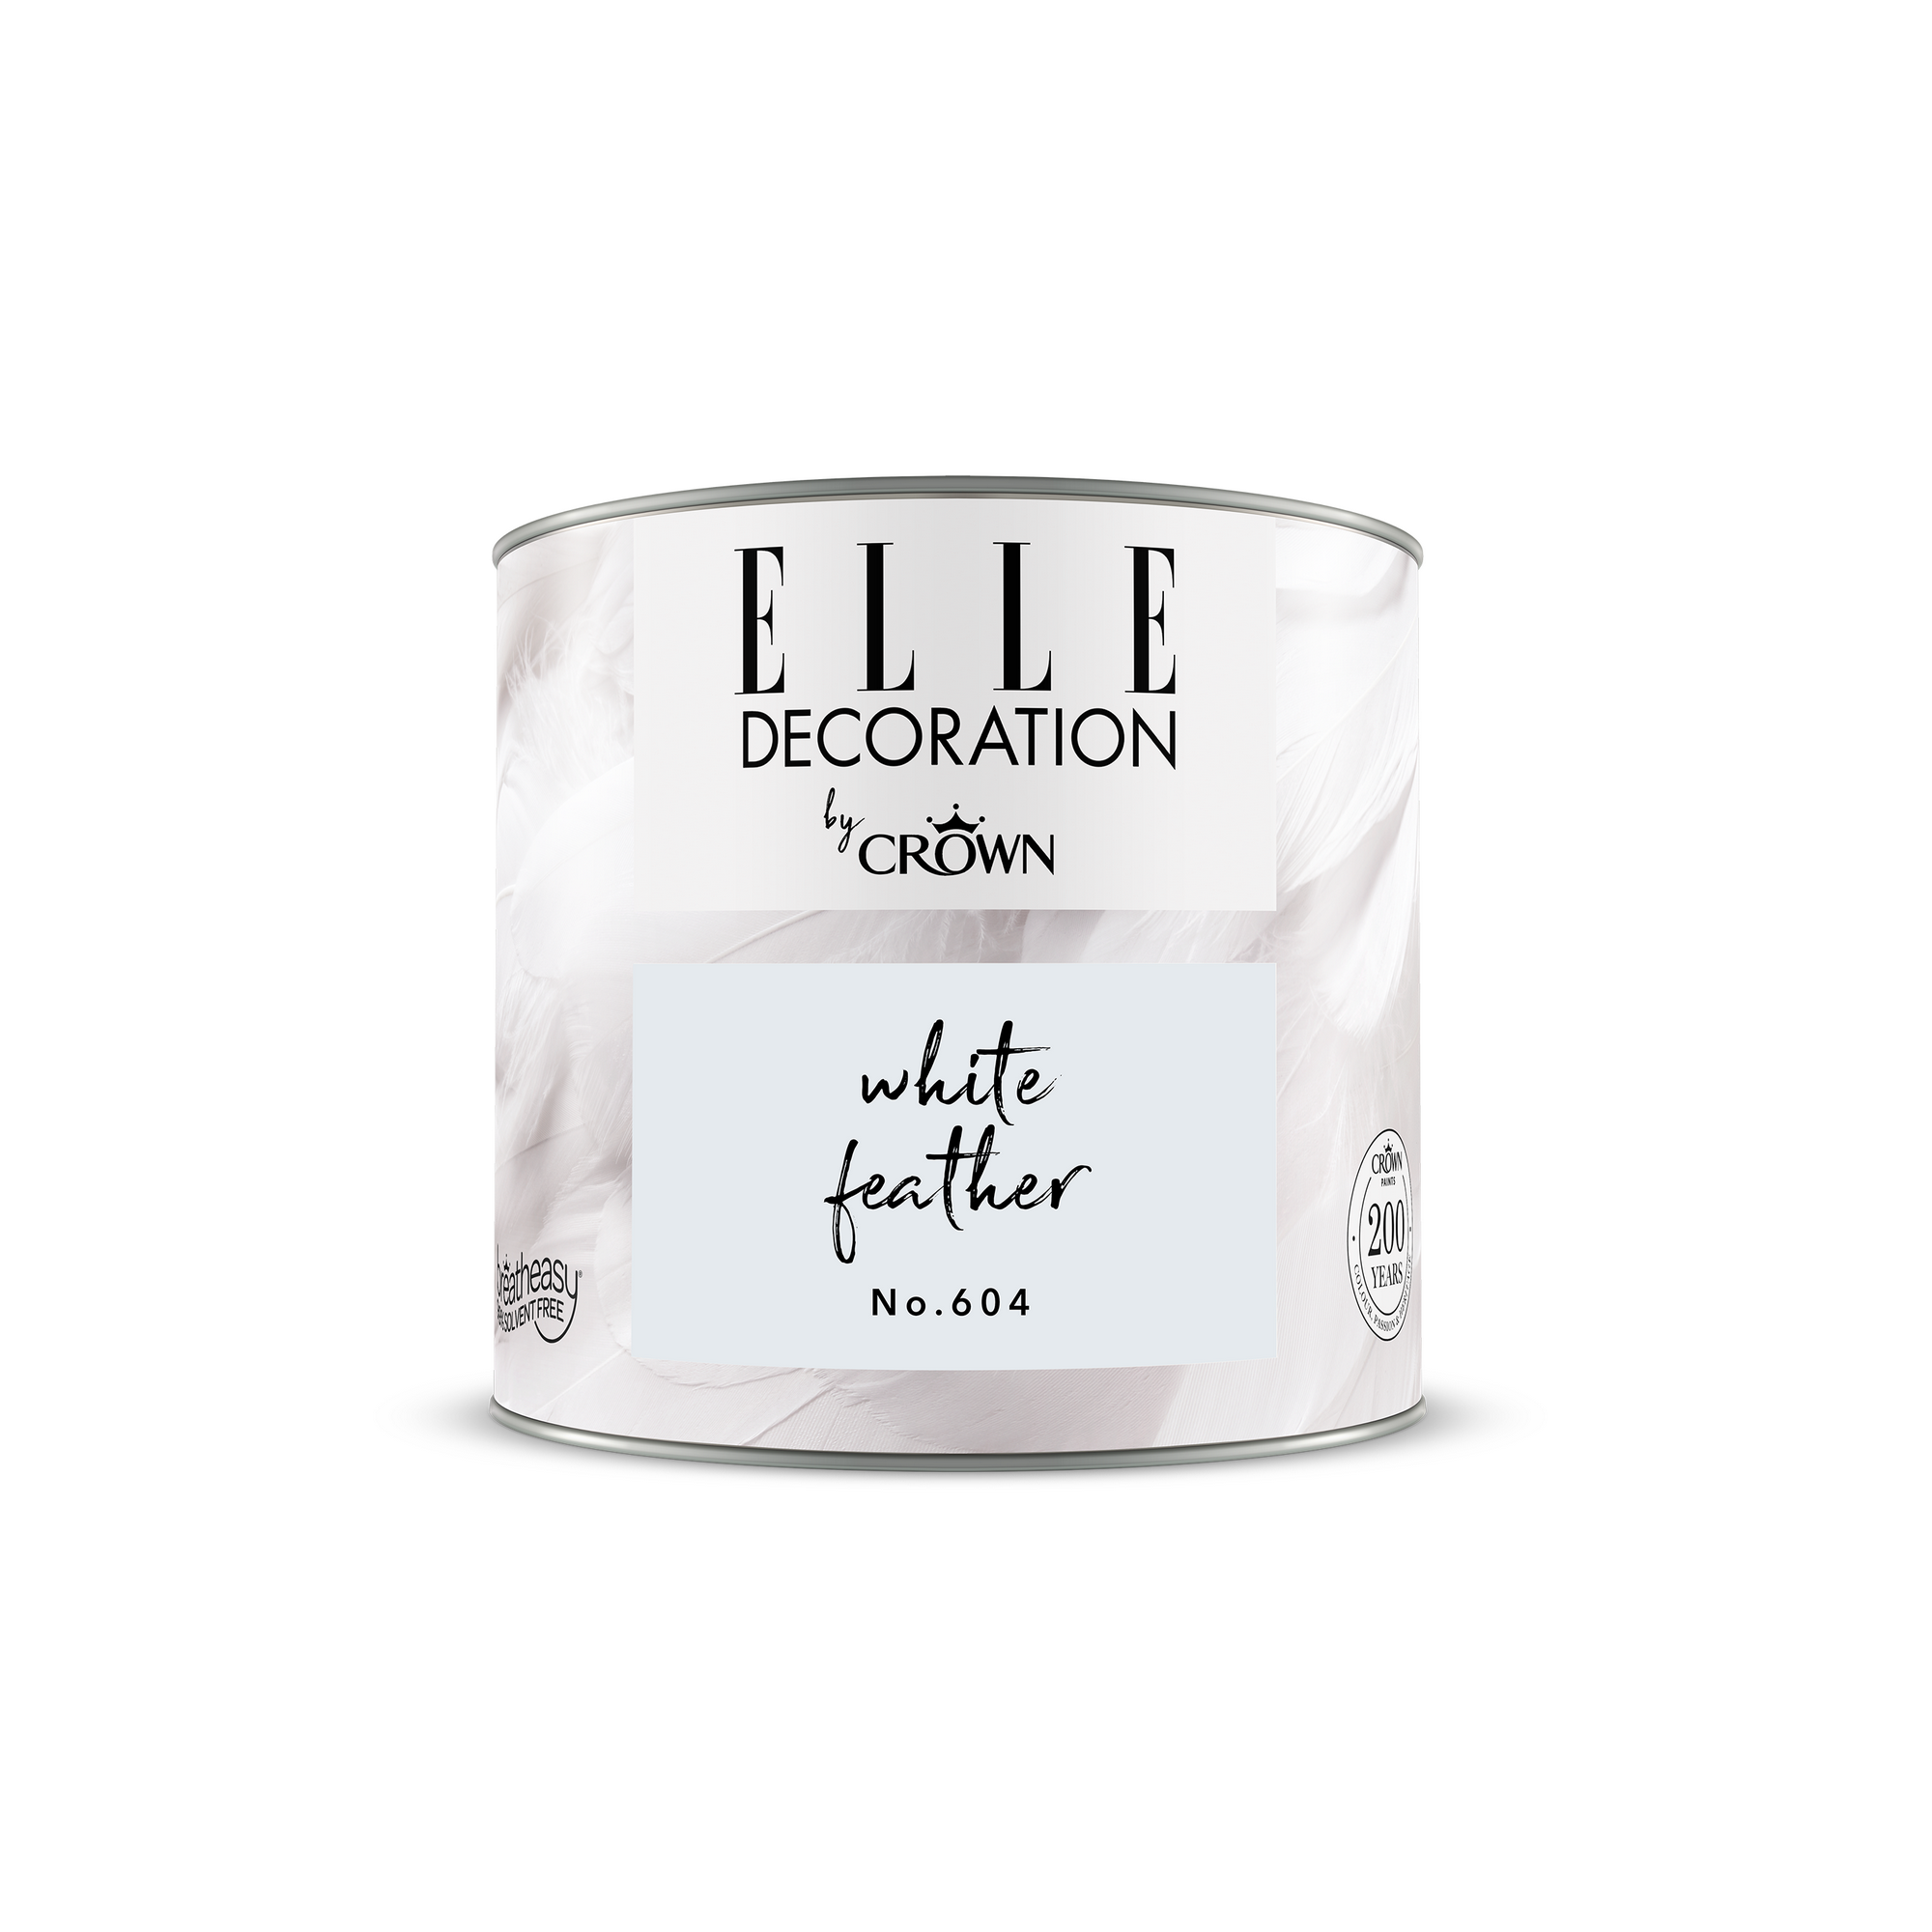 Image of ELLE Decoration by Crown Premium Wandfarbe 'White Feather No. 604' 125 ml